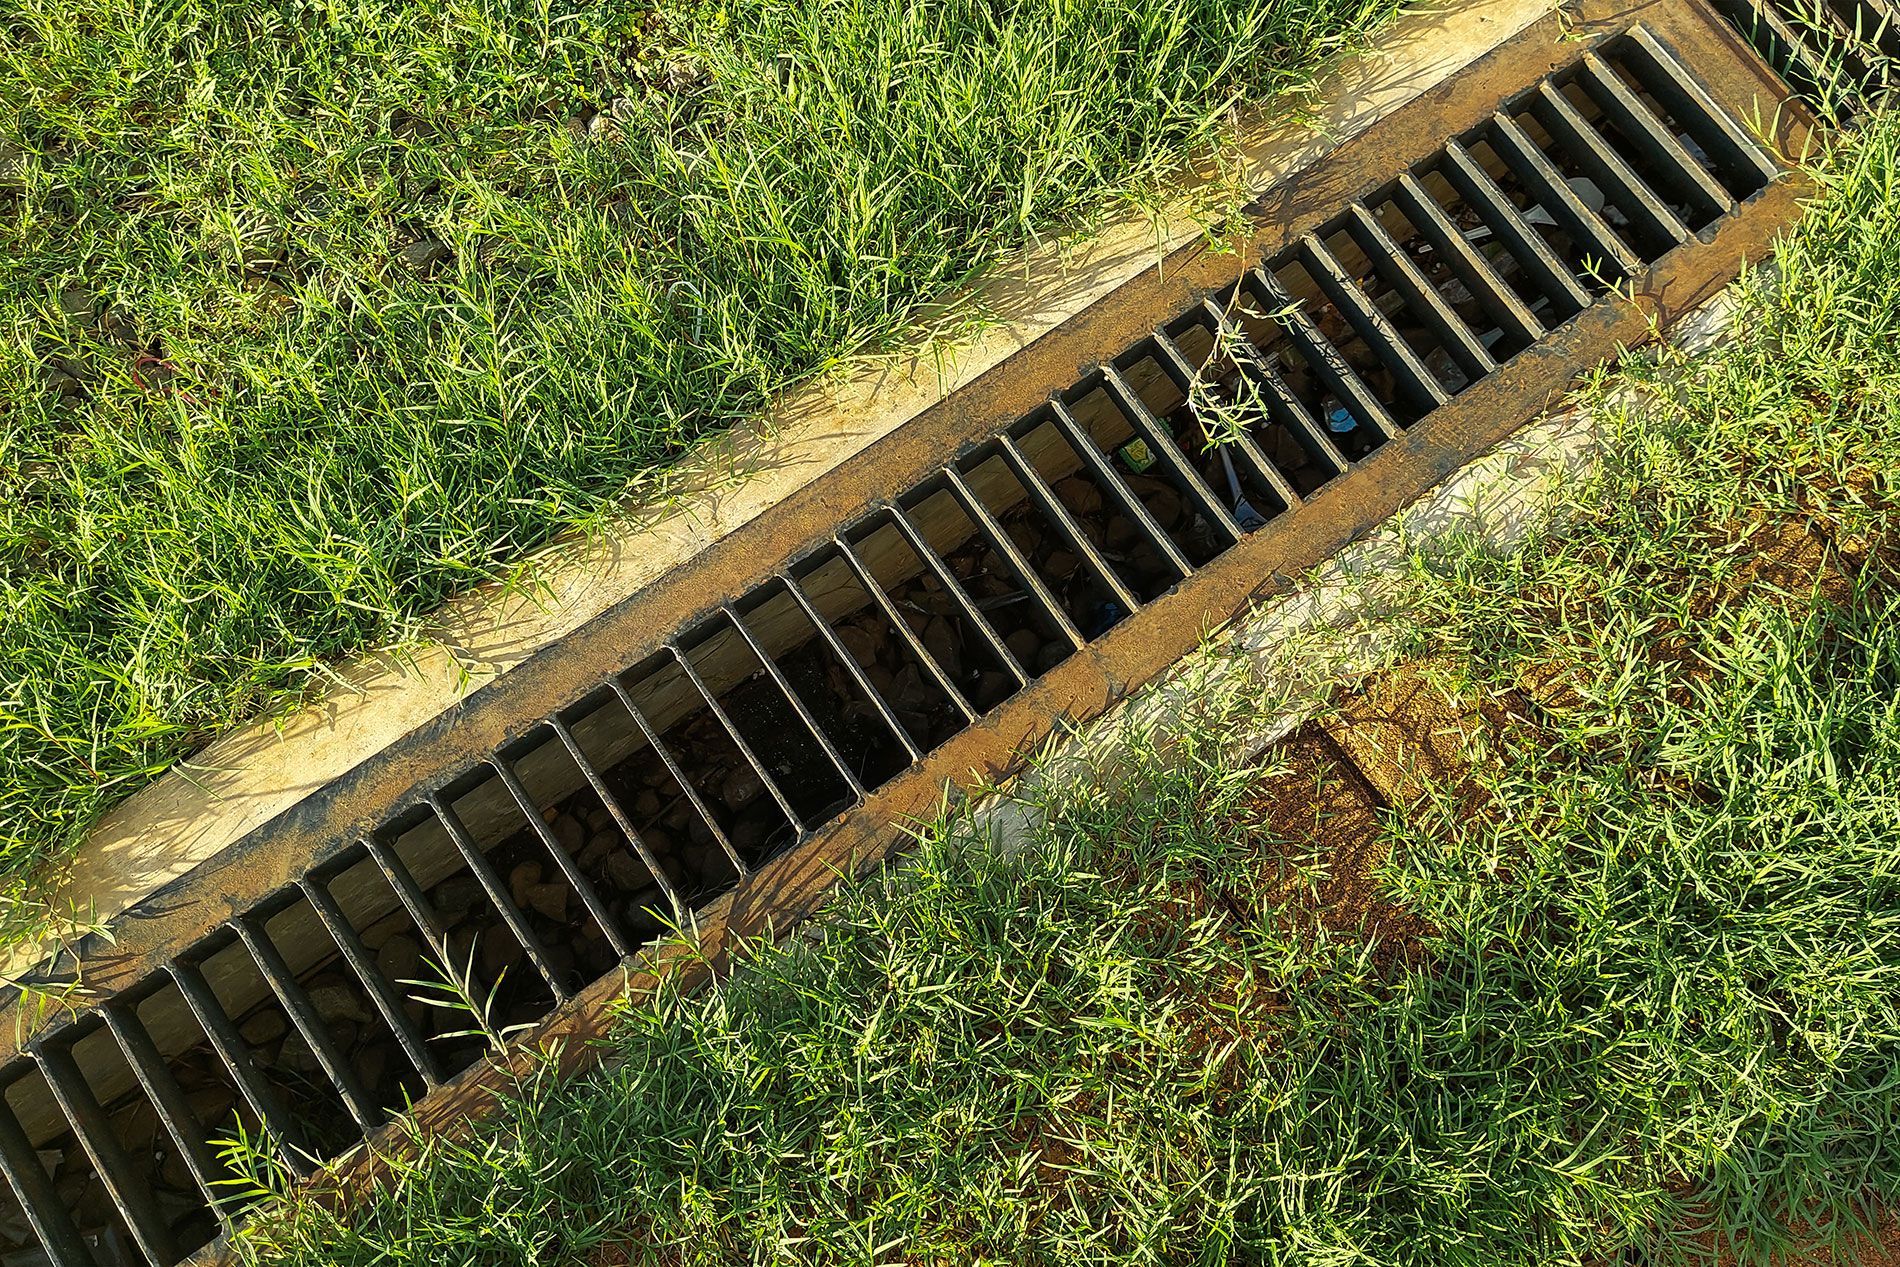 Drainage Systems 101